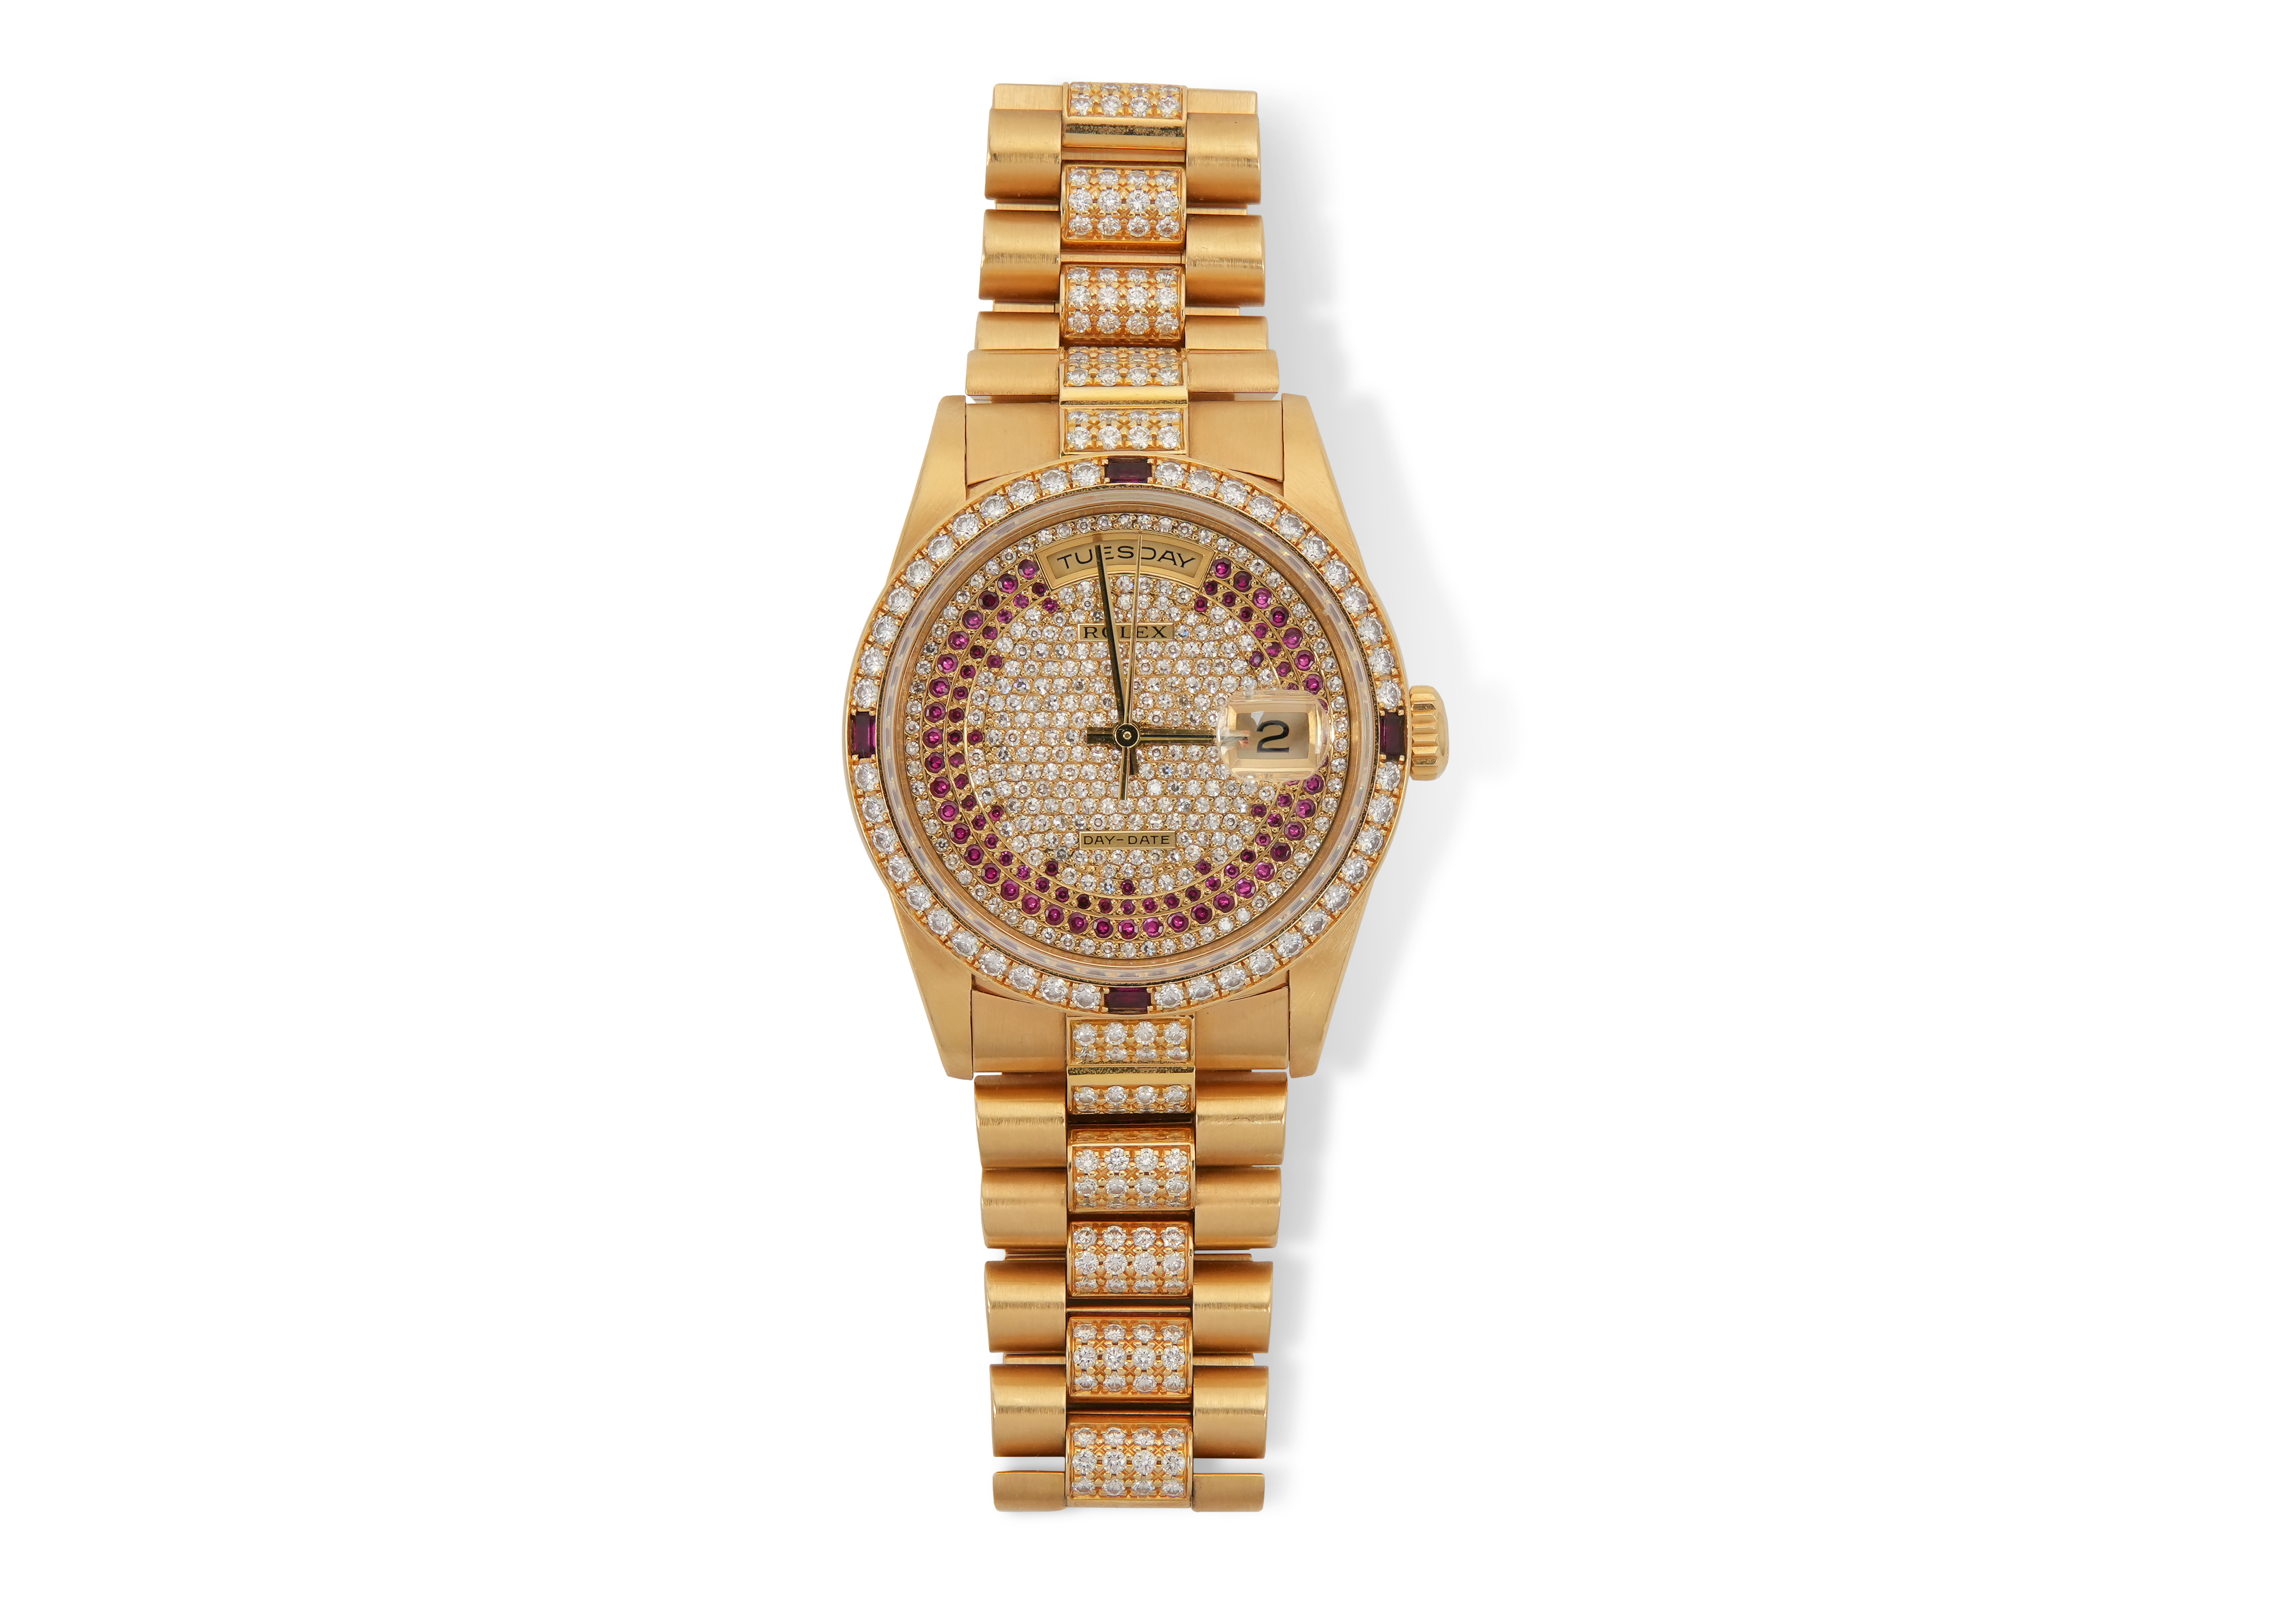 Rolex Day-Date 18ct Yellow Gold Diamond and Ruby Face Wrist Watch - Image 2 of 5